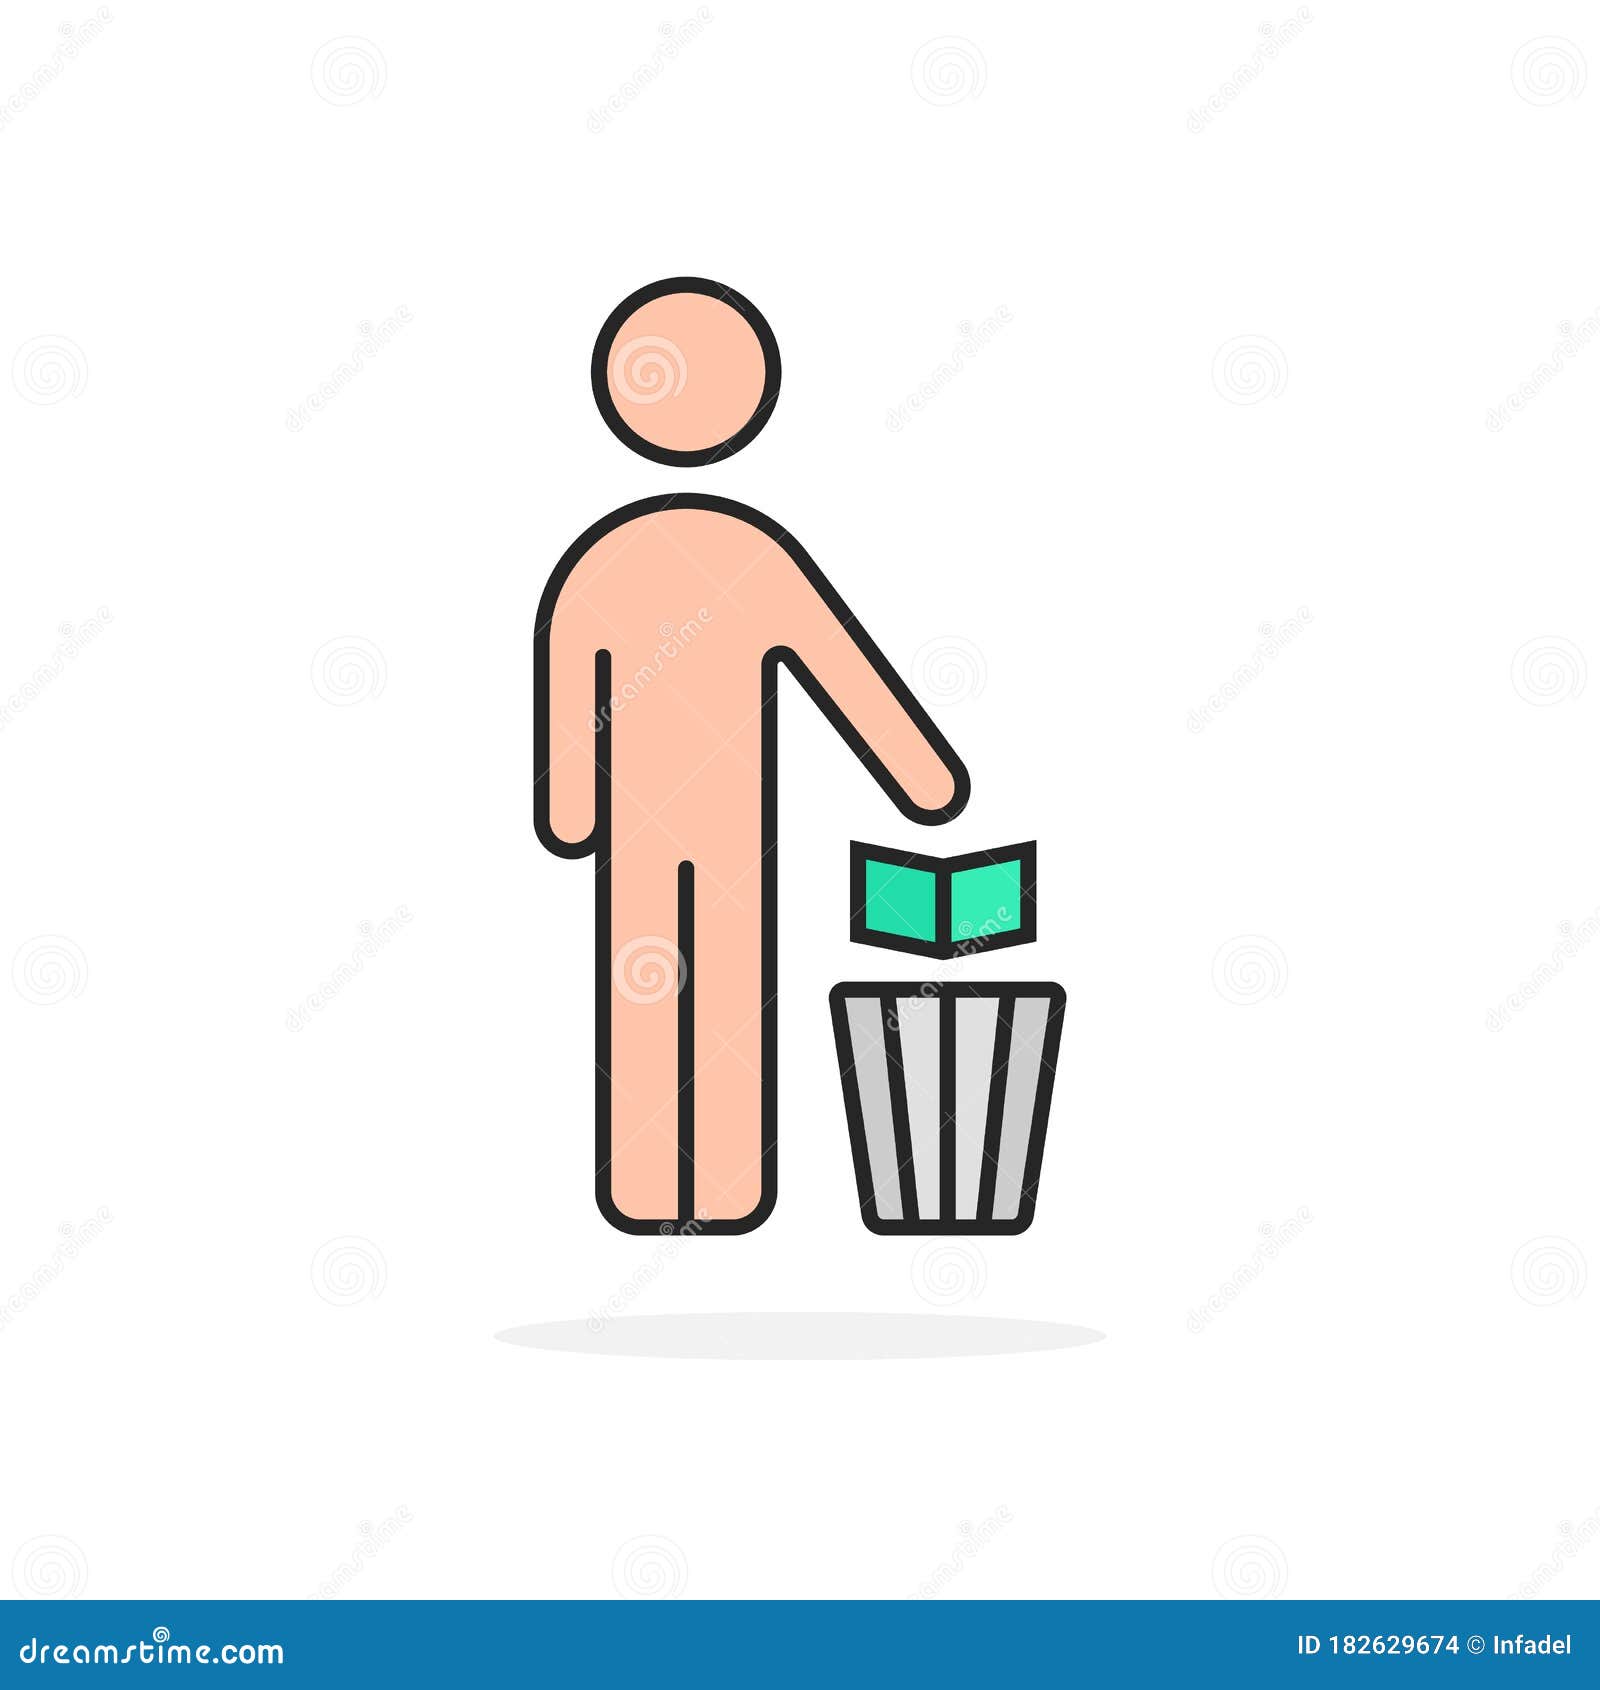 Cartoon Simple Man and Trash Can Stock Vector - Illustration of pollution,  pictogram: 182629674